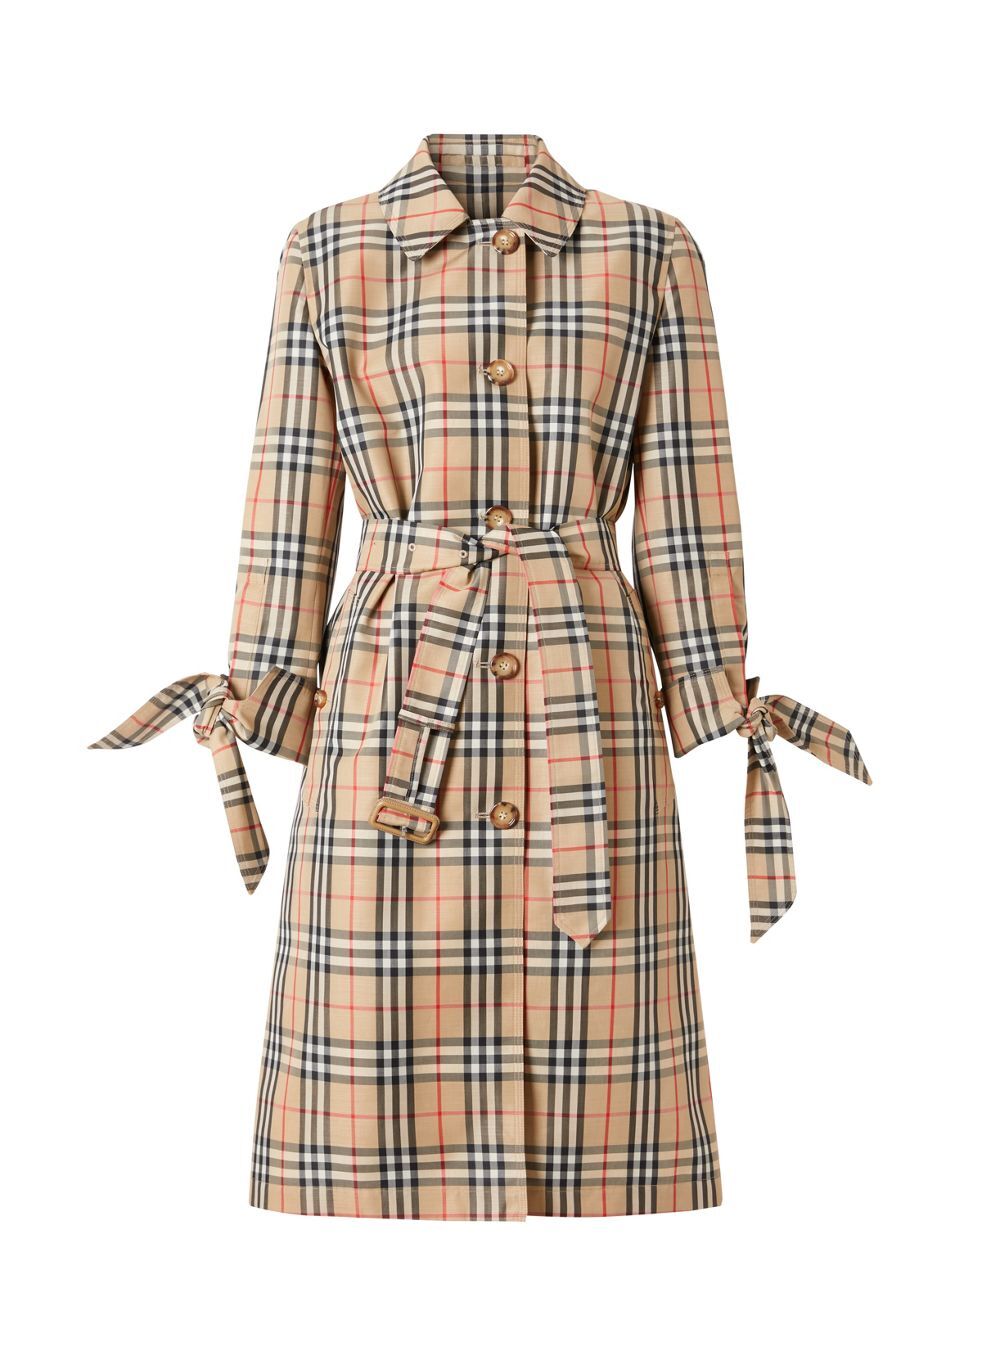 burberry 2 piece outfit women's